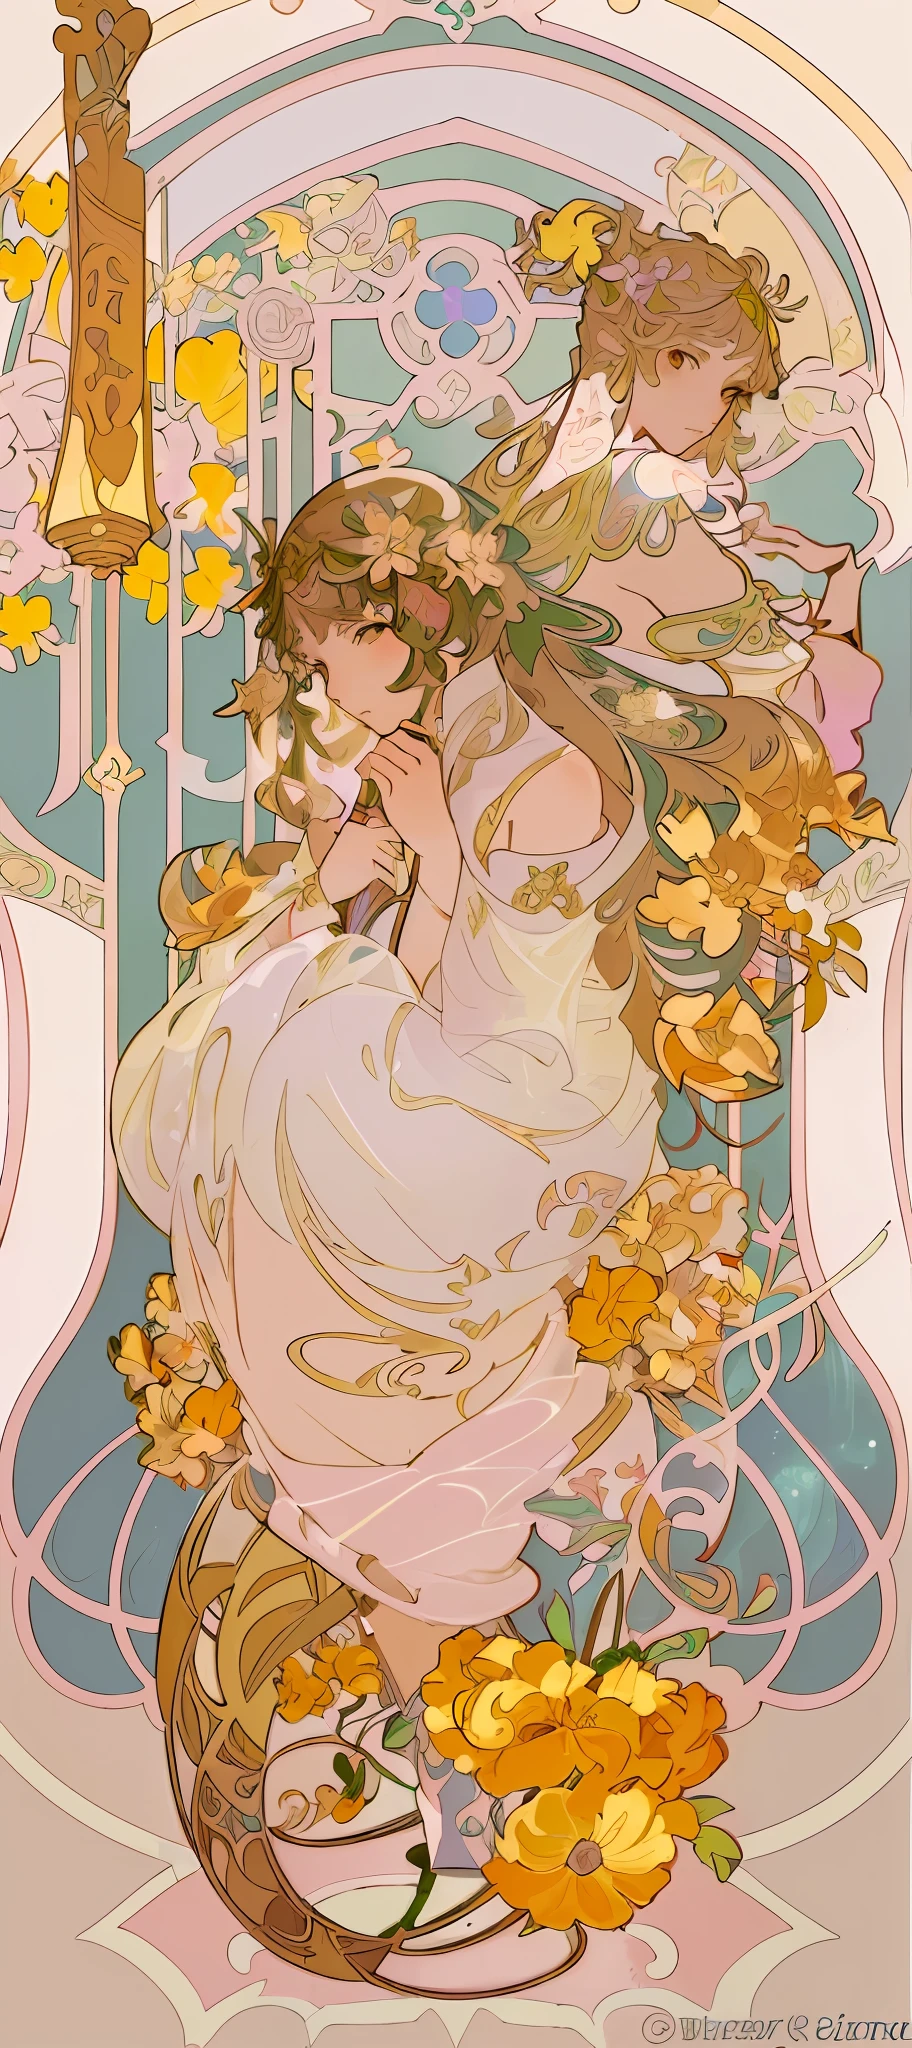 a painting of a woman sitting on a chair with flowers, anime art nouveau, alphonse mucha and rossdraws, alphonse mucha style, korean art nouveau anime, flat shading mucha, in style of alphonse mucha, demura and alphonse mucha, anime art nouveau cosmic display, inspired by Alfonse Mucha, mucha style, flat cel shading mucha